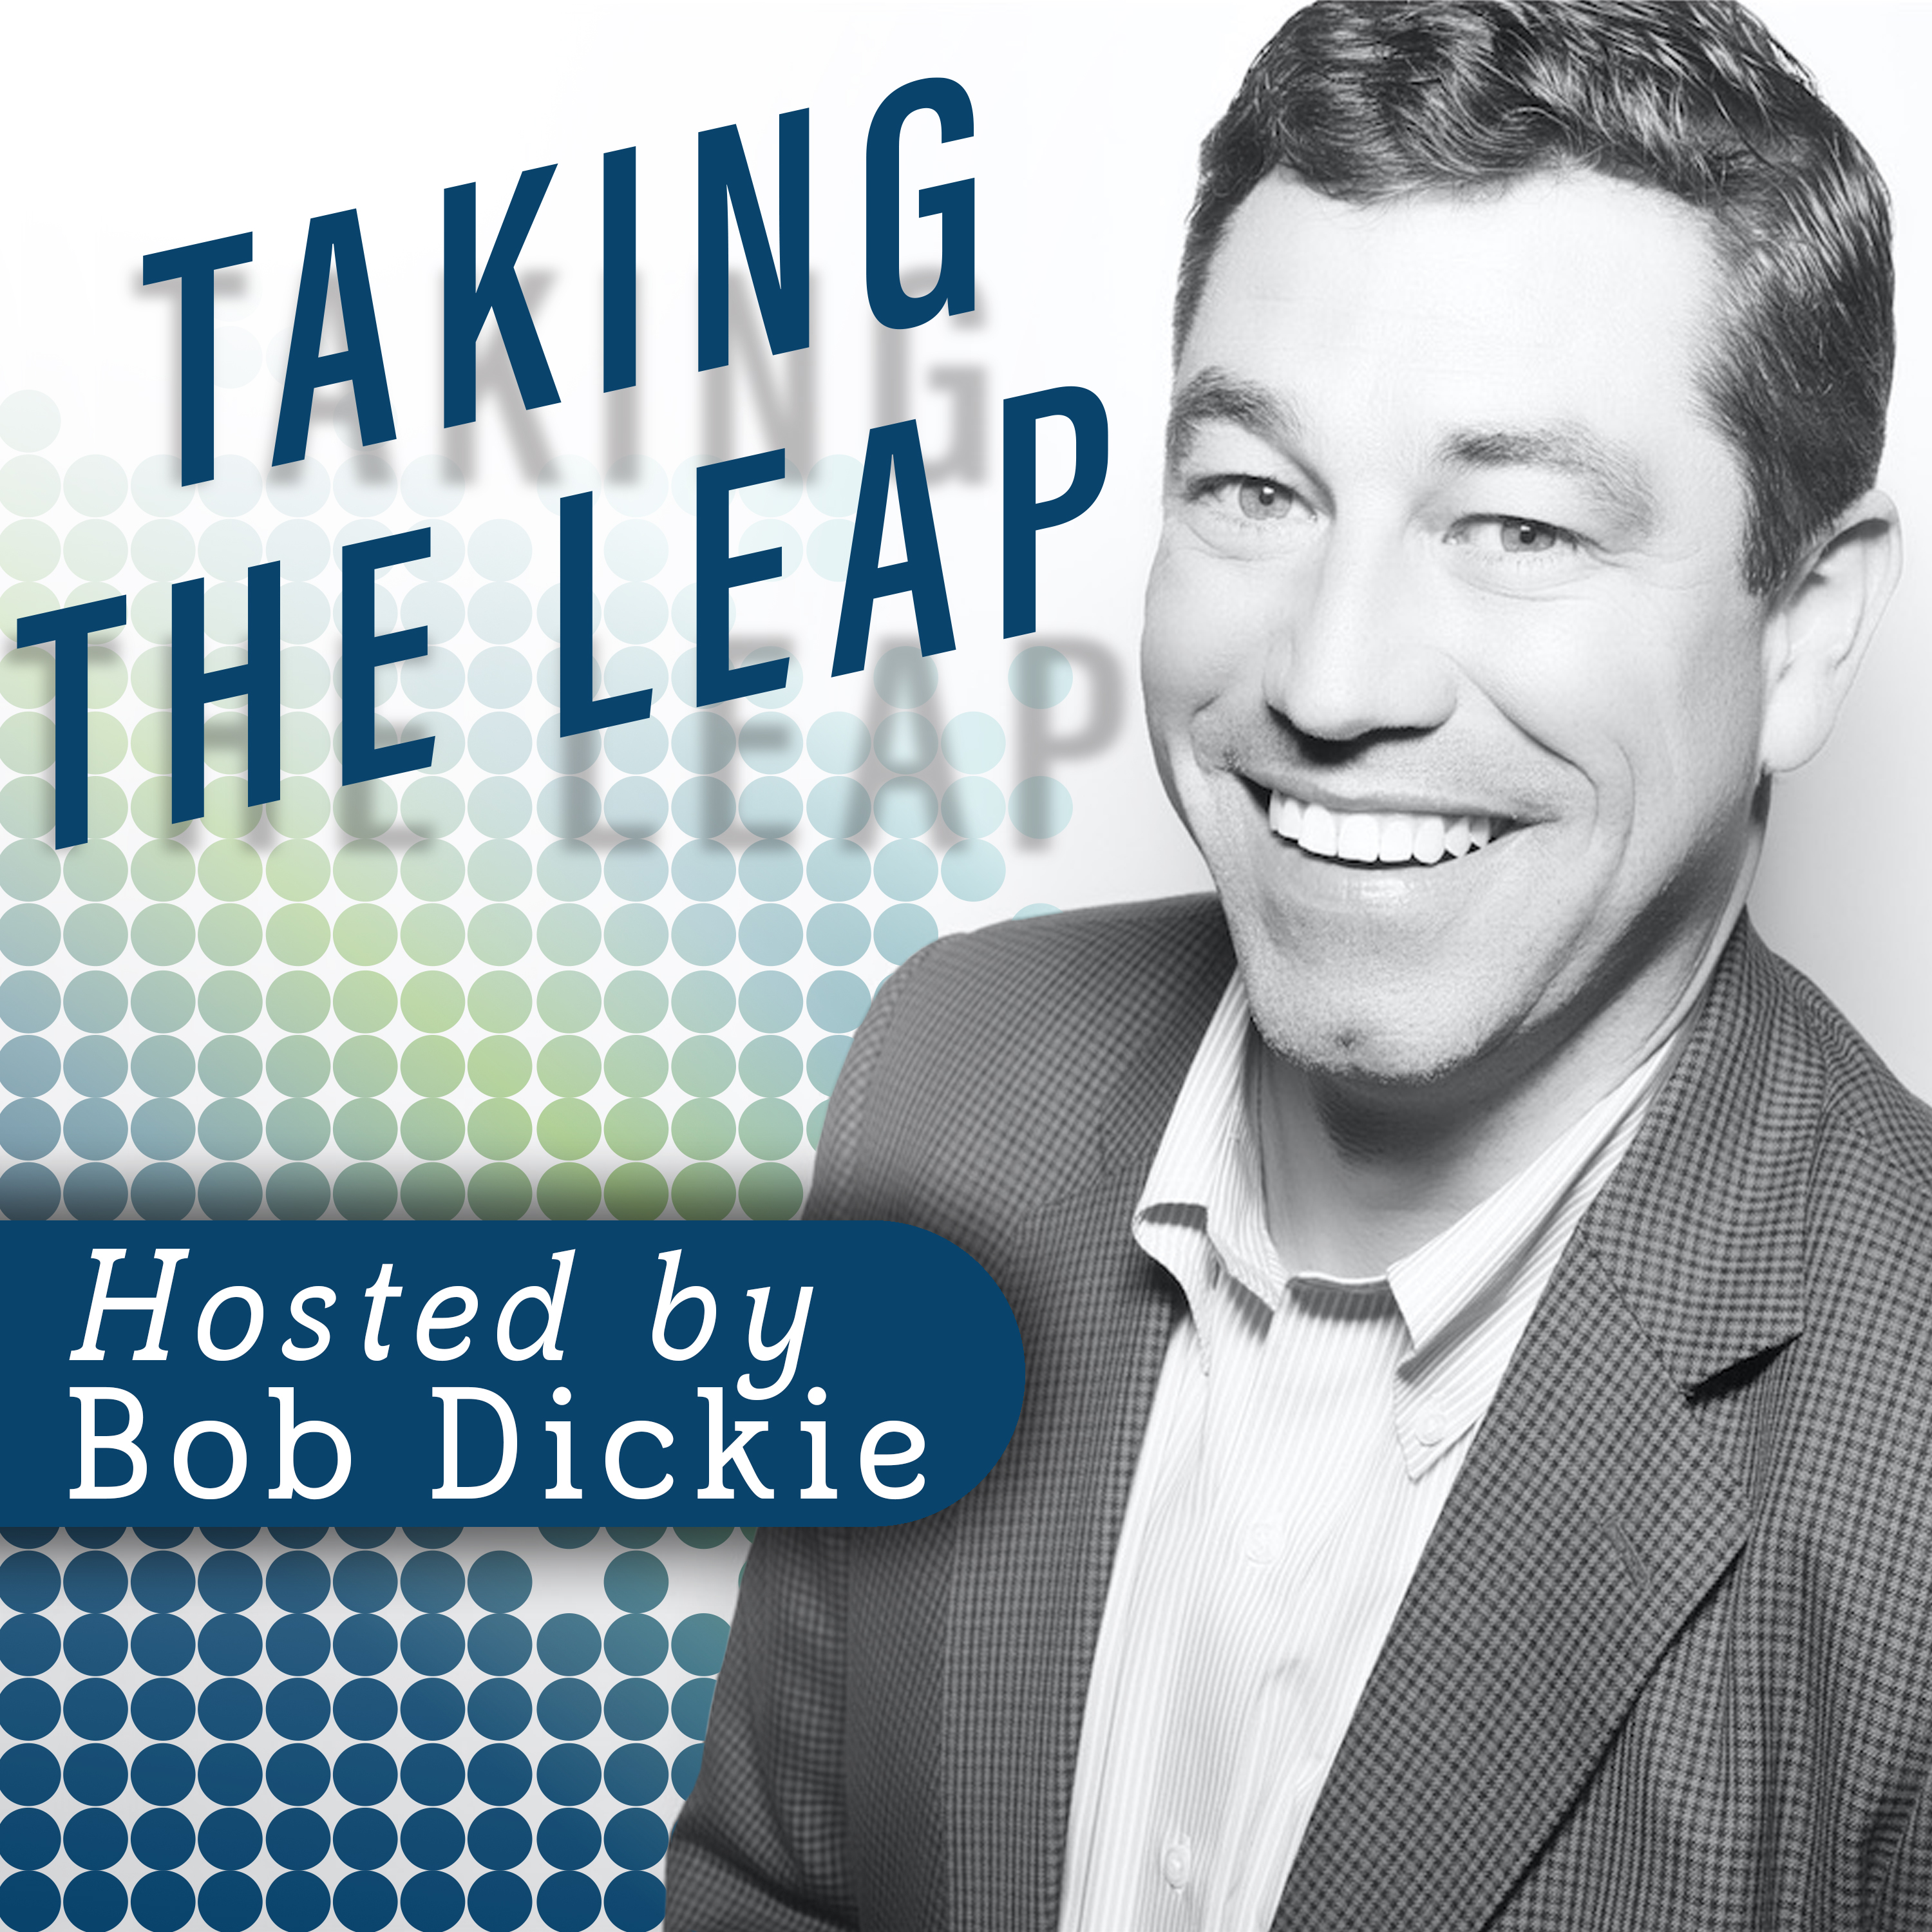 Bonvera is excited to launch Taking the Leap podcast with CEO Bob Dickie.